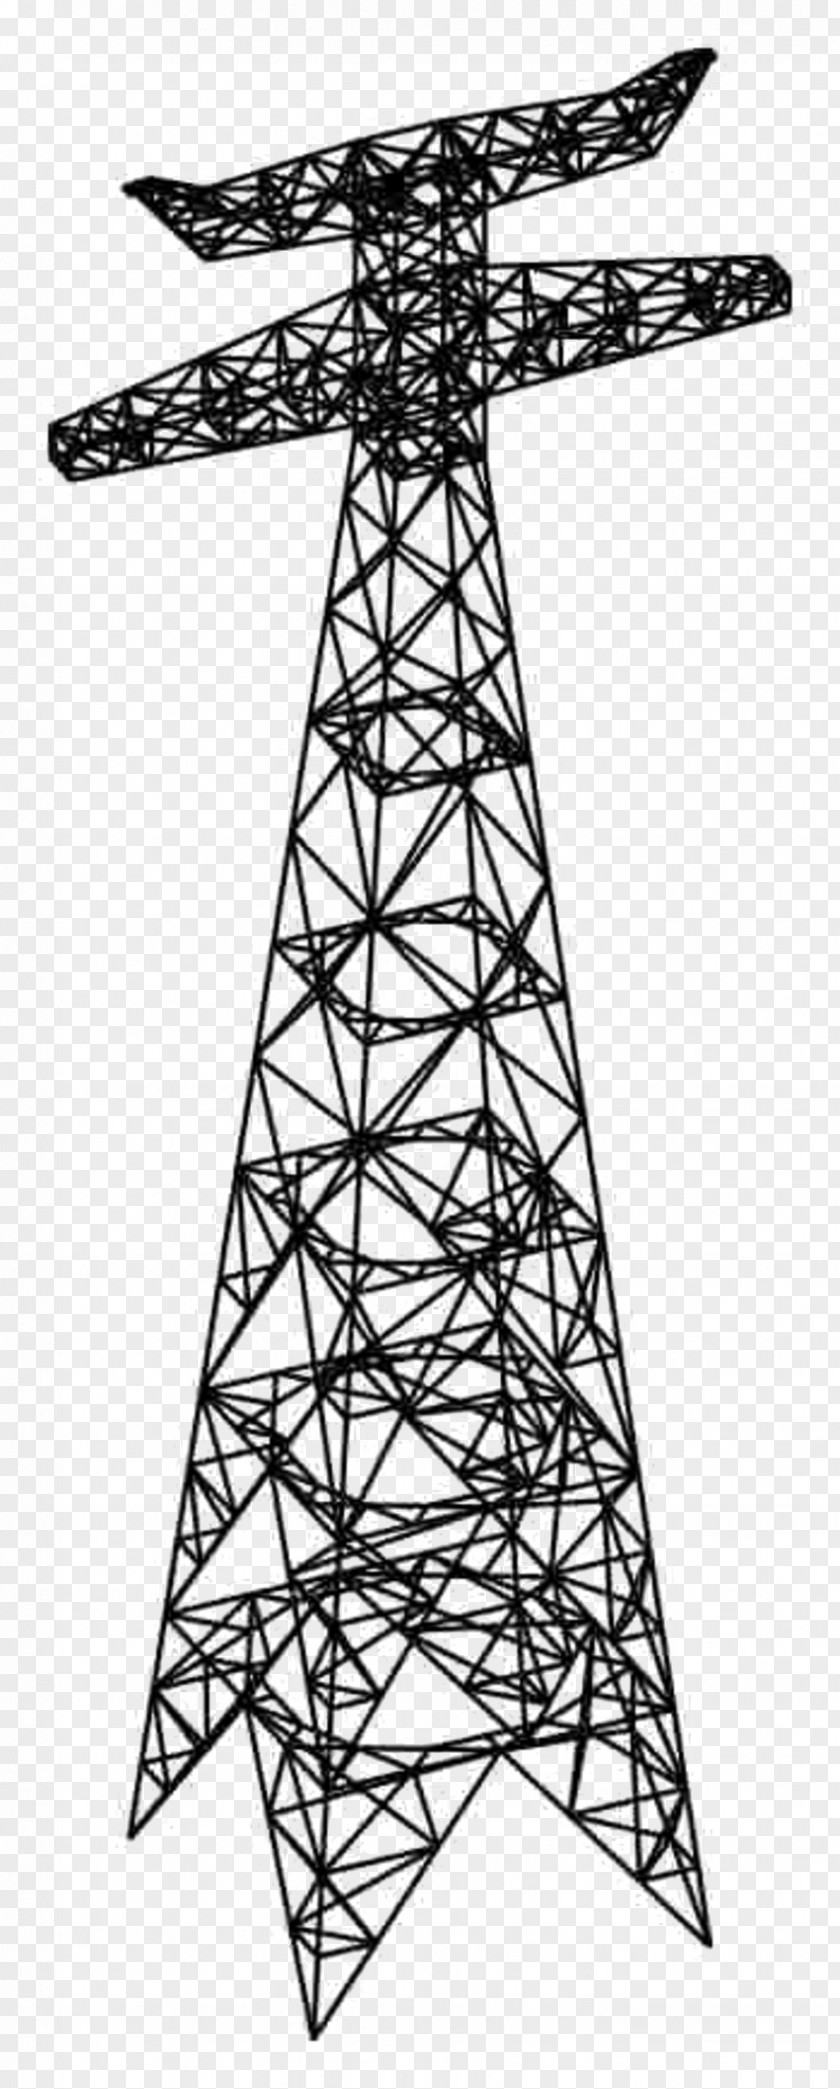 High Voltage Transmission Tower Electricity Electric Power PNG